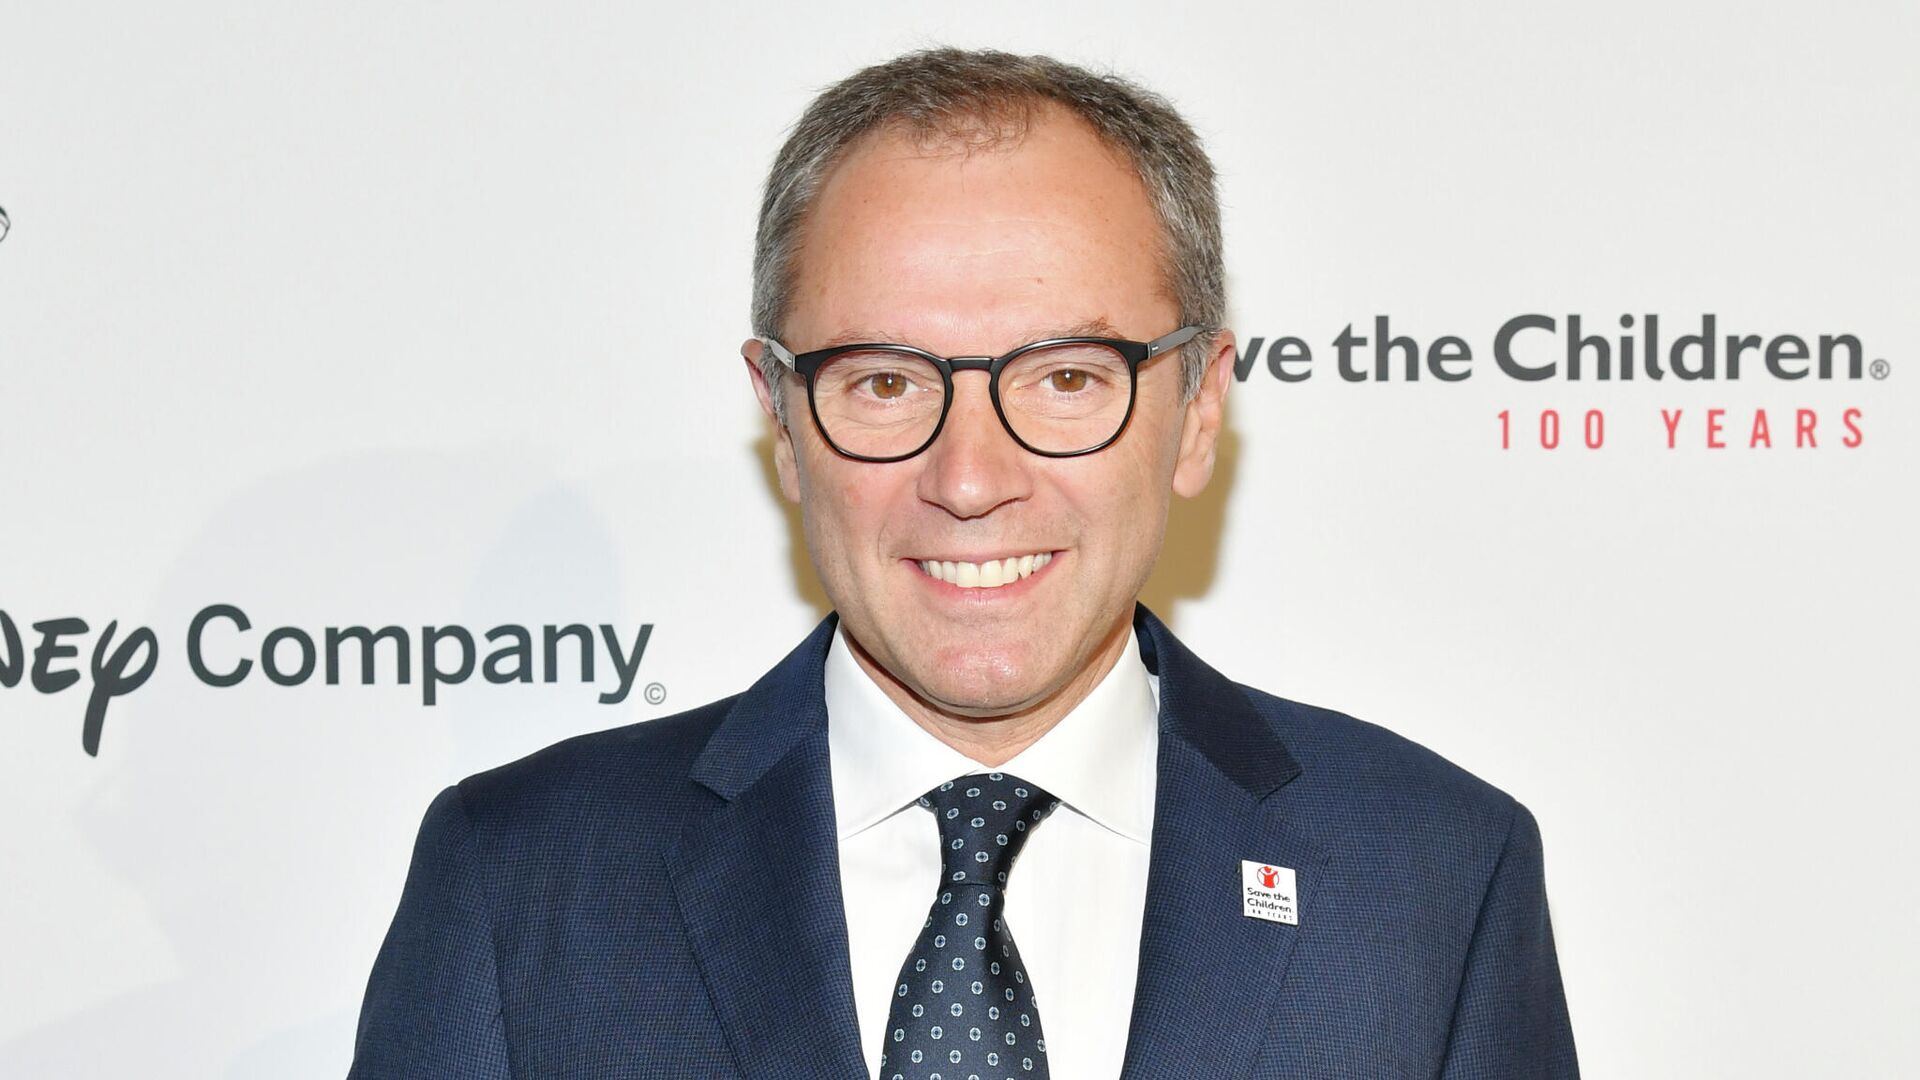 BEVERLY HILLS, CALIFORNIA - OCTOBER 02: Stefano Domenicali attends Save the Children's Centennial Celebration: Once In A Lifetime Presented By The Walt Disney Company at The Beverly Hilton Hotel on October 02, 2019 in Beverly Hills, California.   Amy Sussman/Getty Images/AFP - РИА Новости, 1920, 23.09.2020